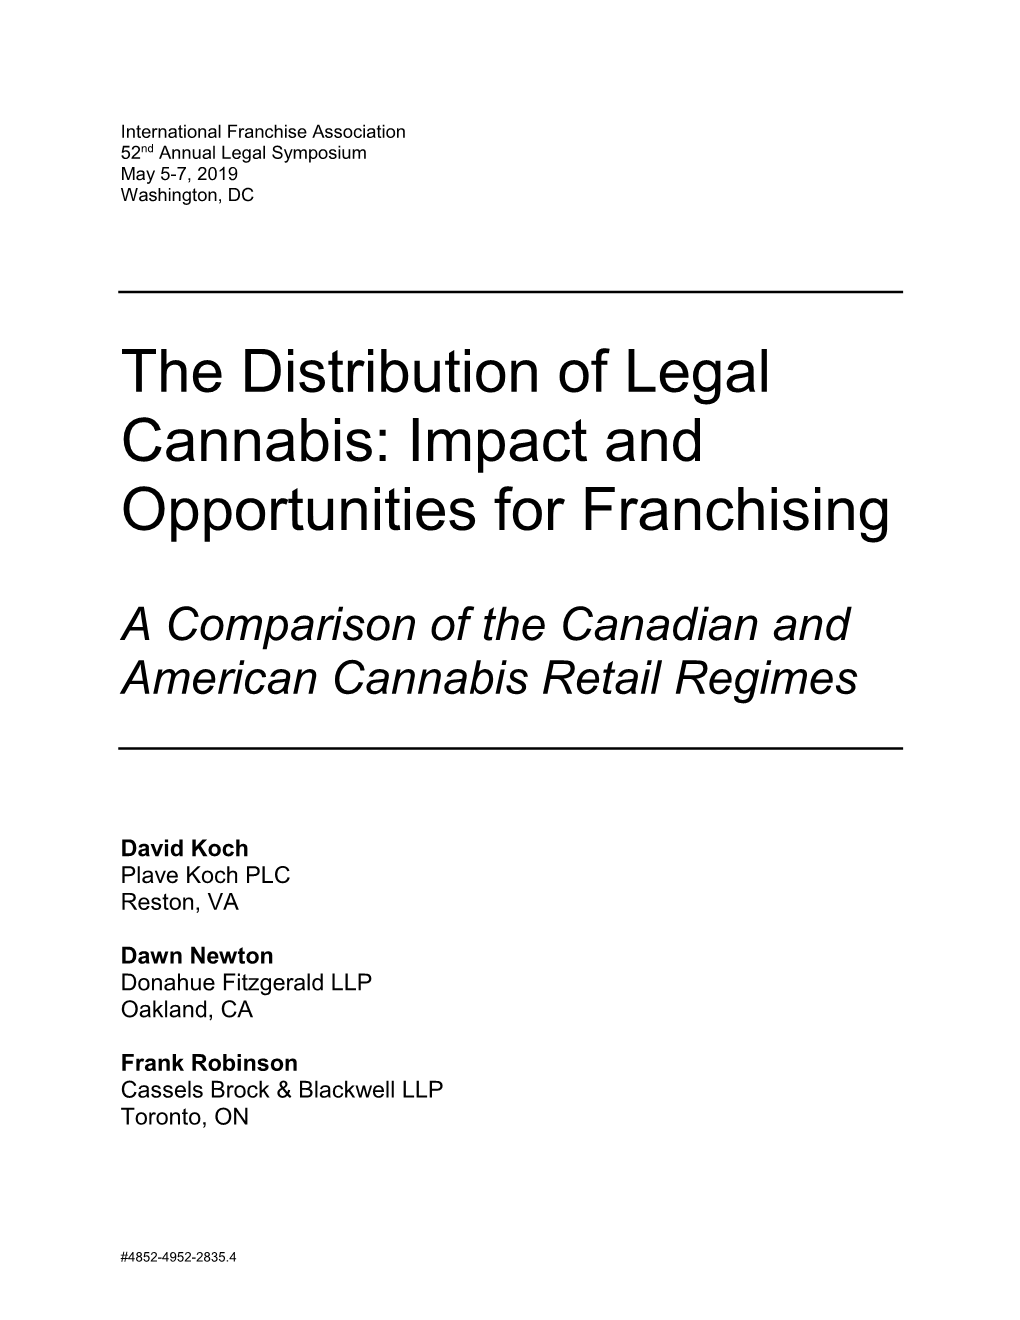 The Distribution of Legal Cannabis: Impact and Opportunities for Franchising